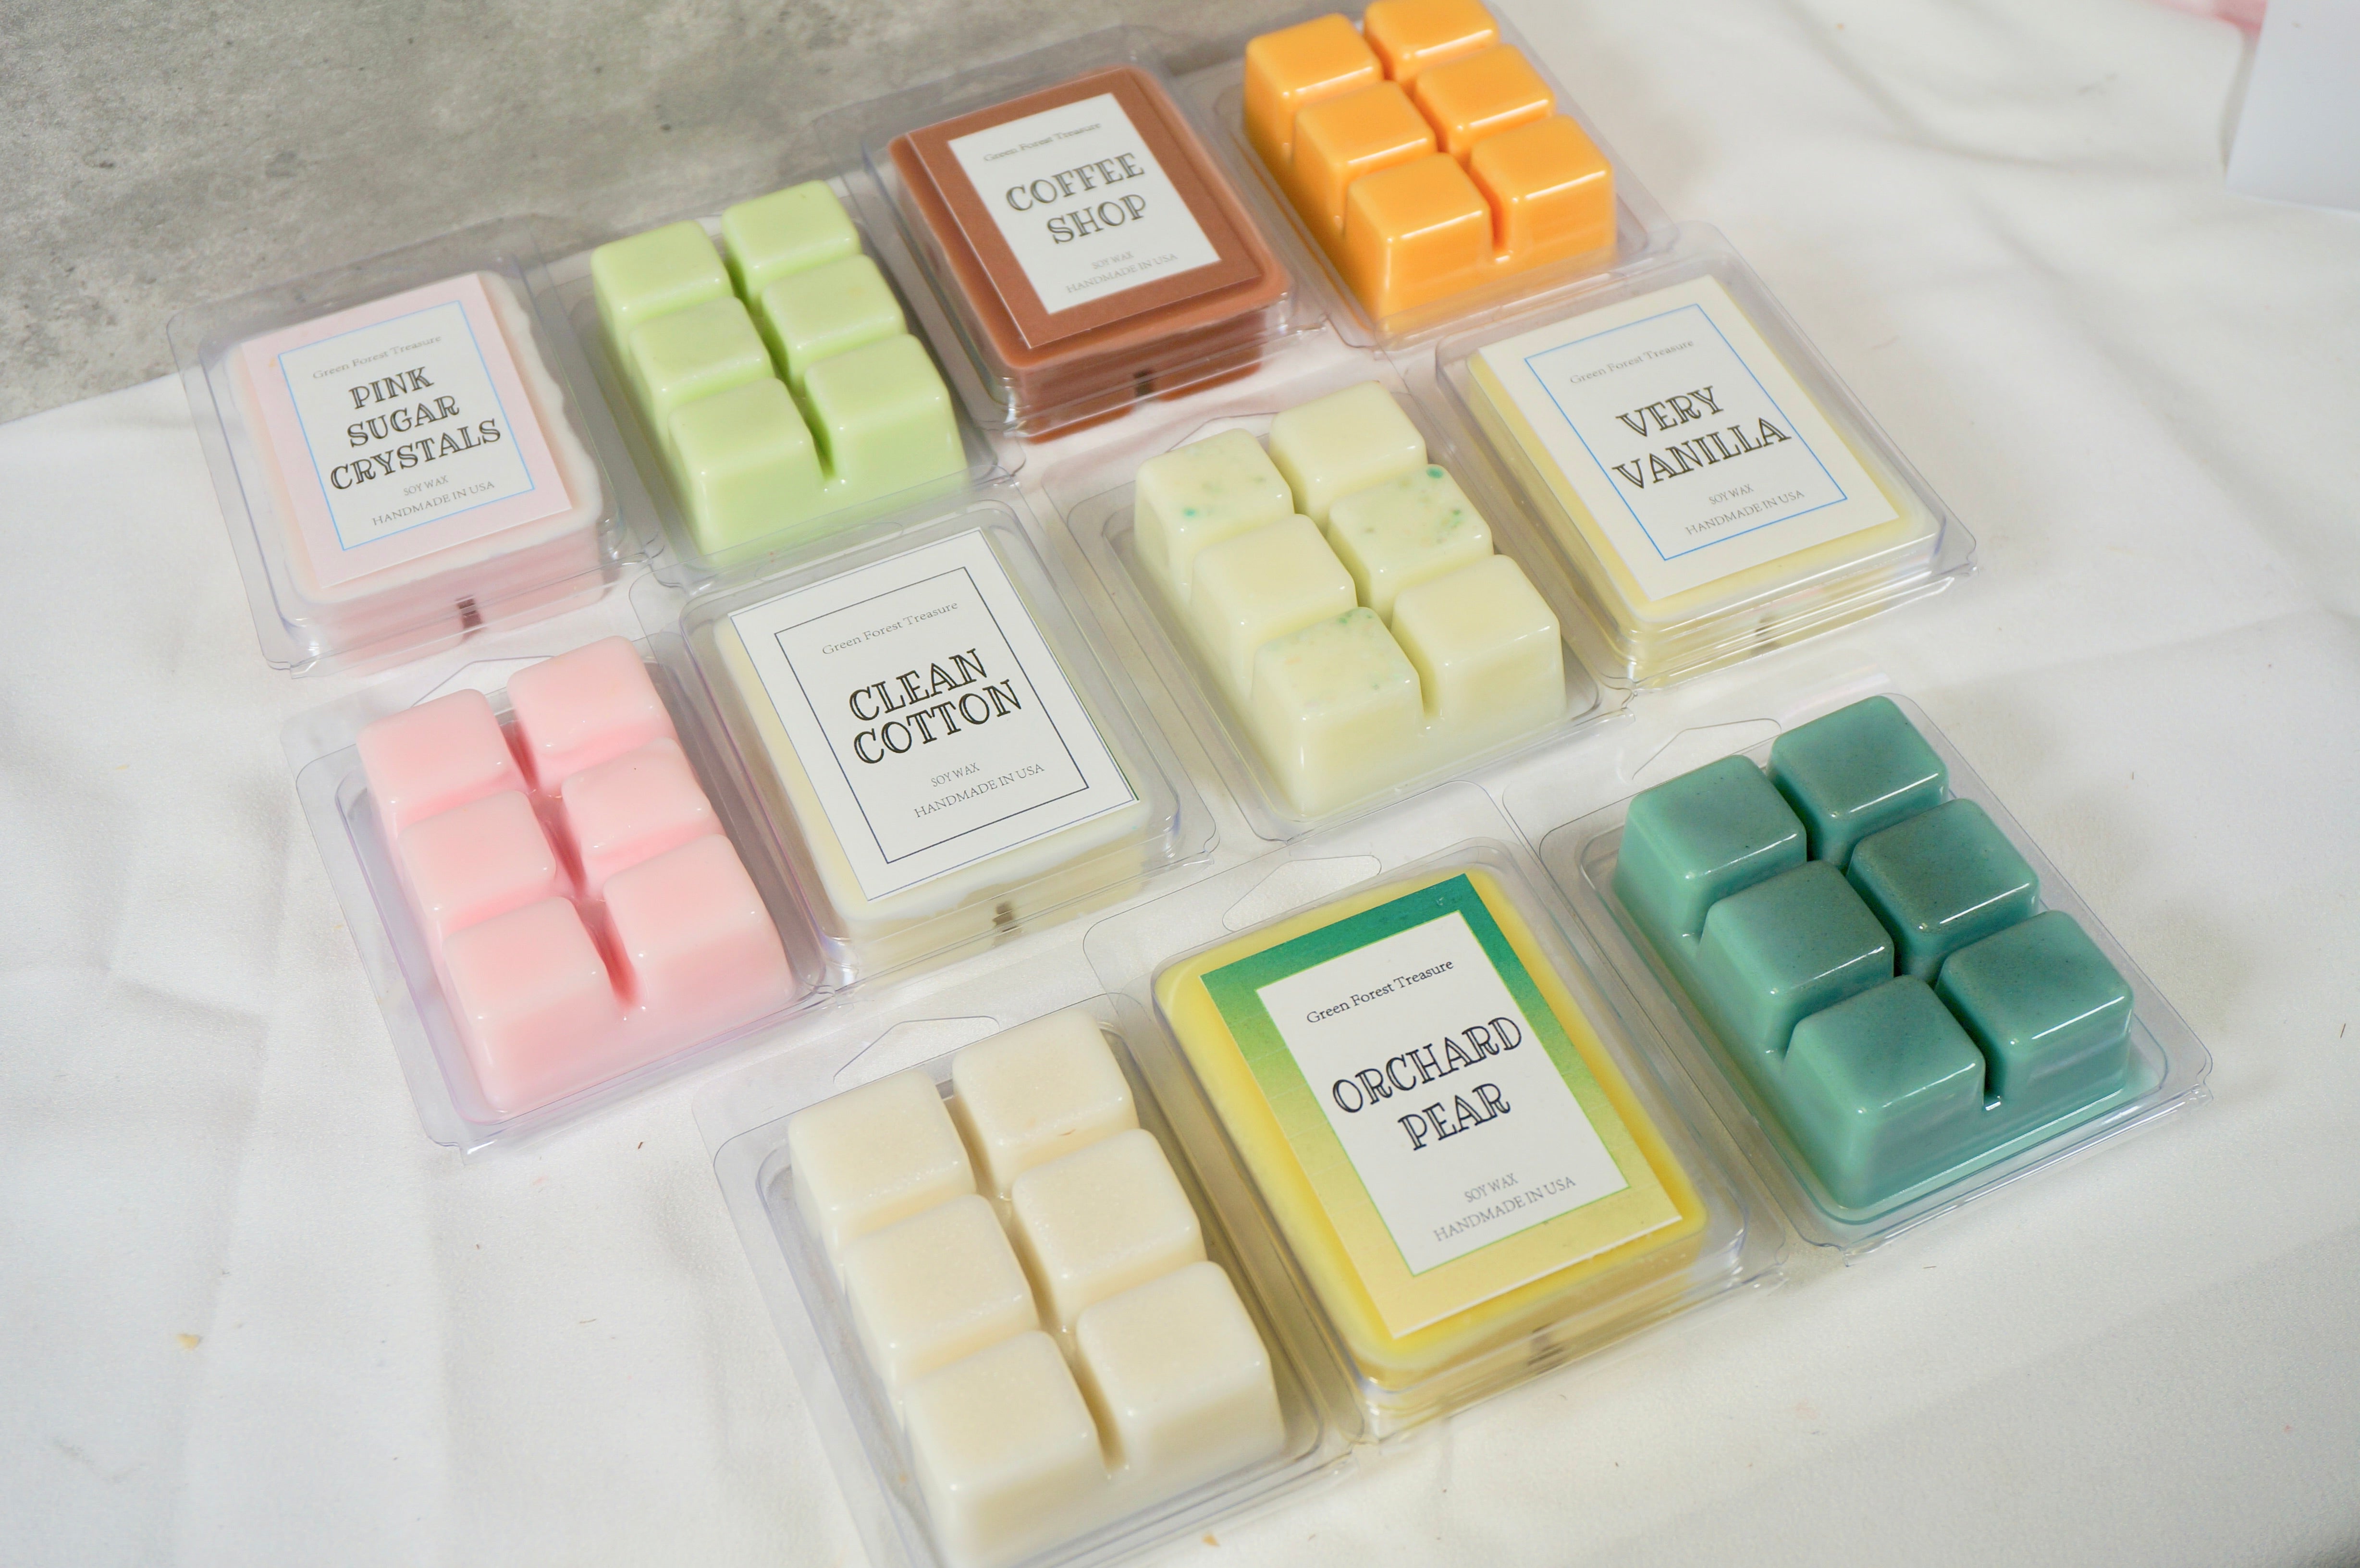 LA BELLEFÉE Wax Melts Wax Cubes Cotton Scented, Handmade Natural Soy Wax  Cubes for Wax Warmer - Long Lasting Fragrance for Home, Ideal for Stress